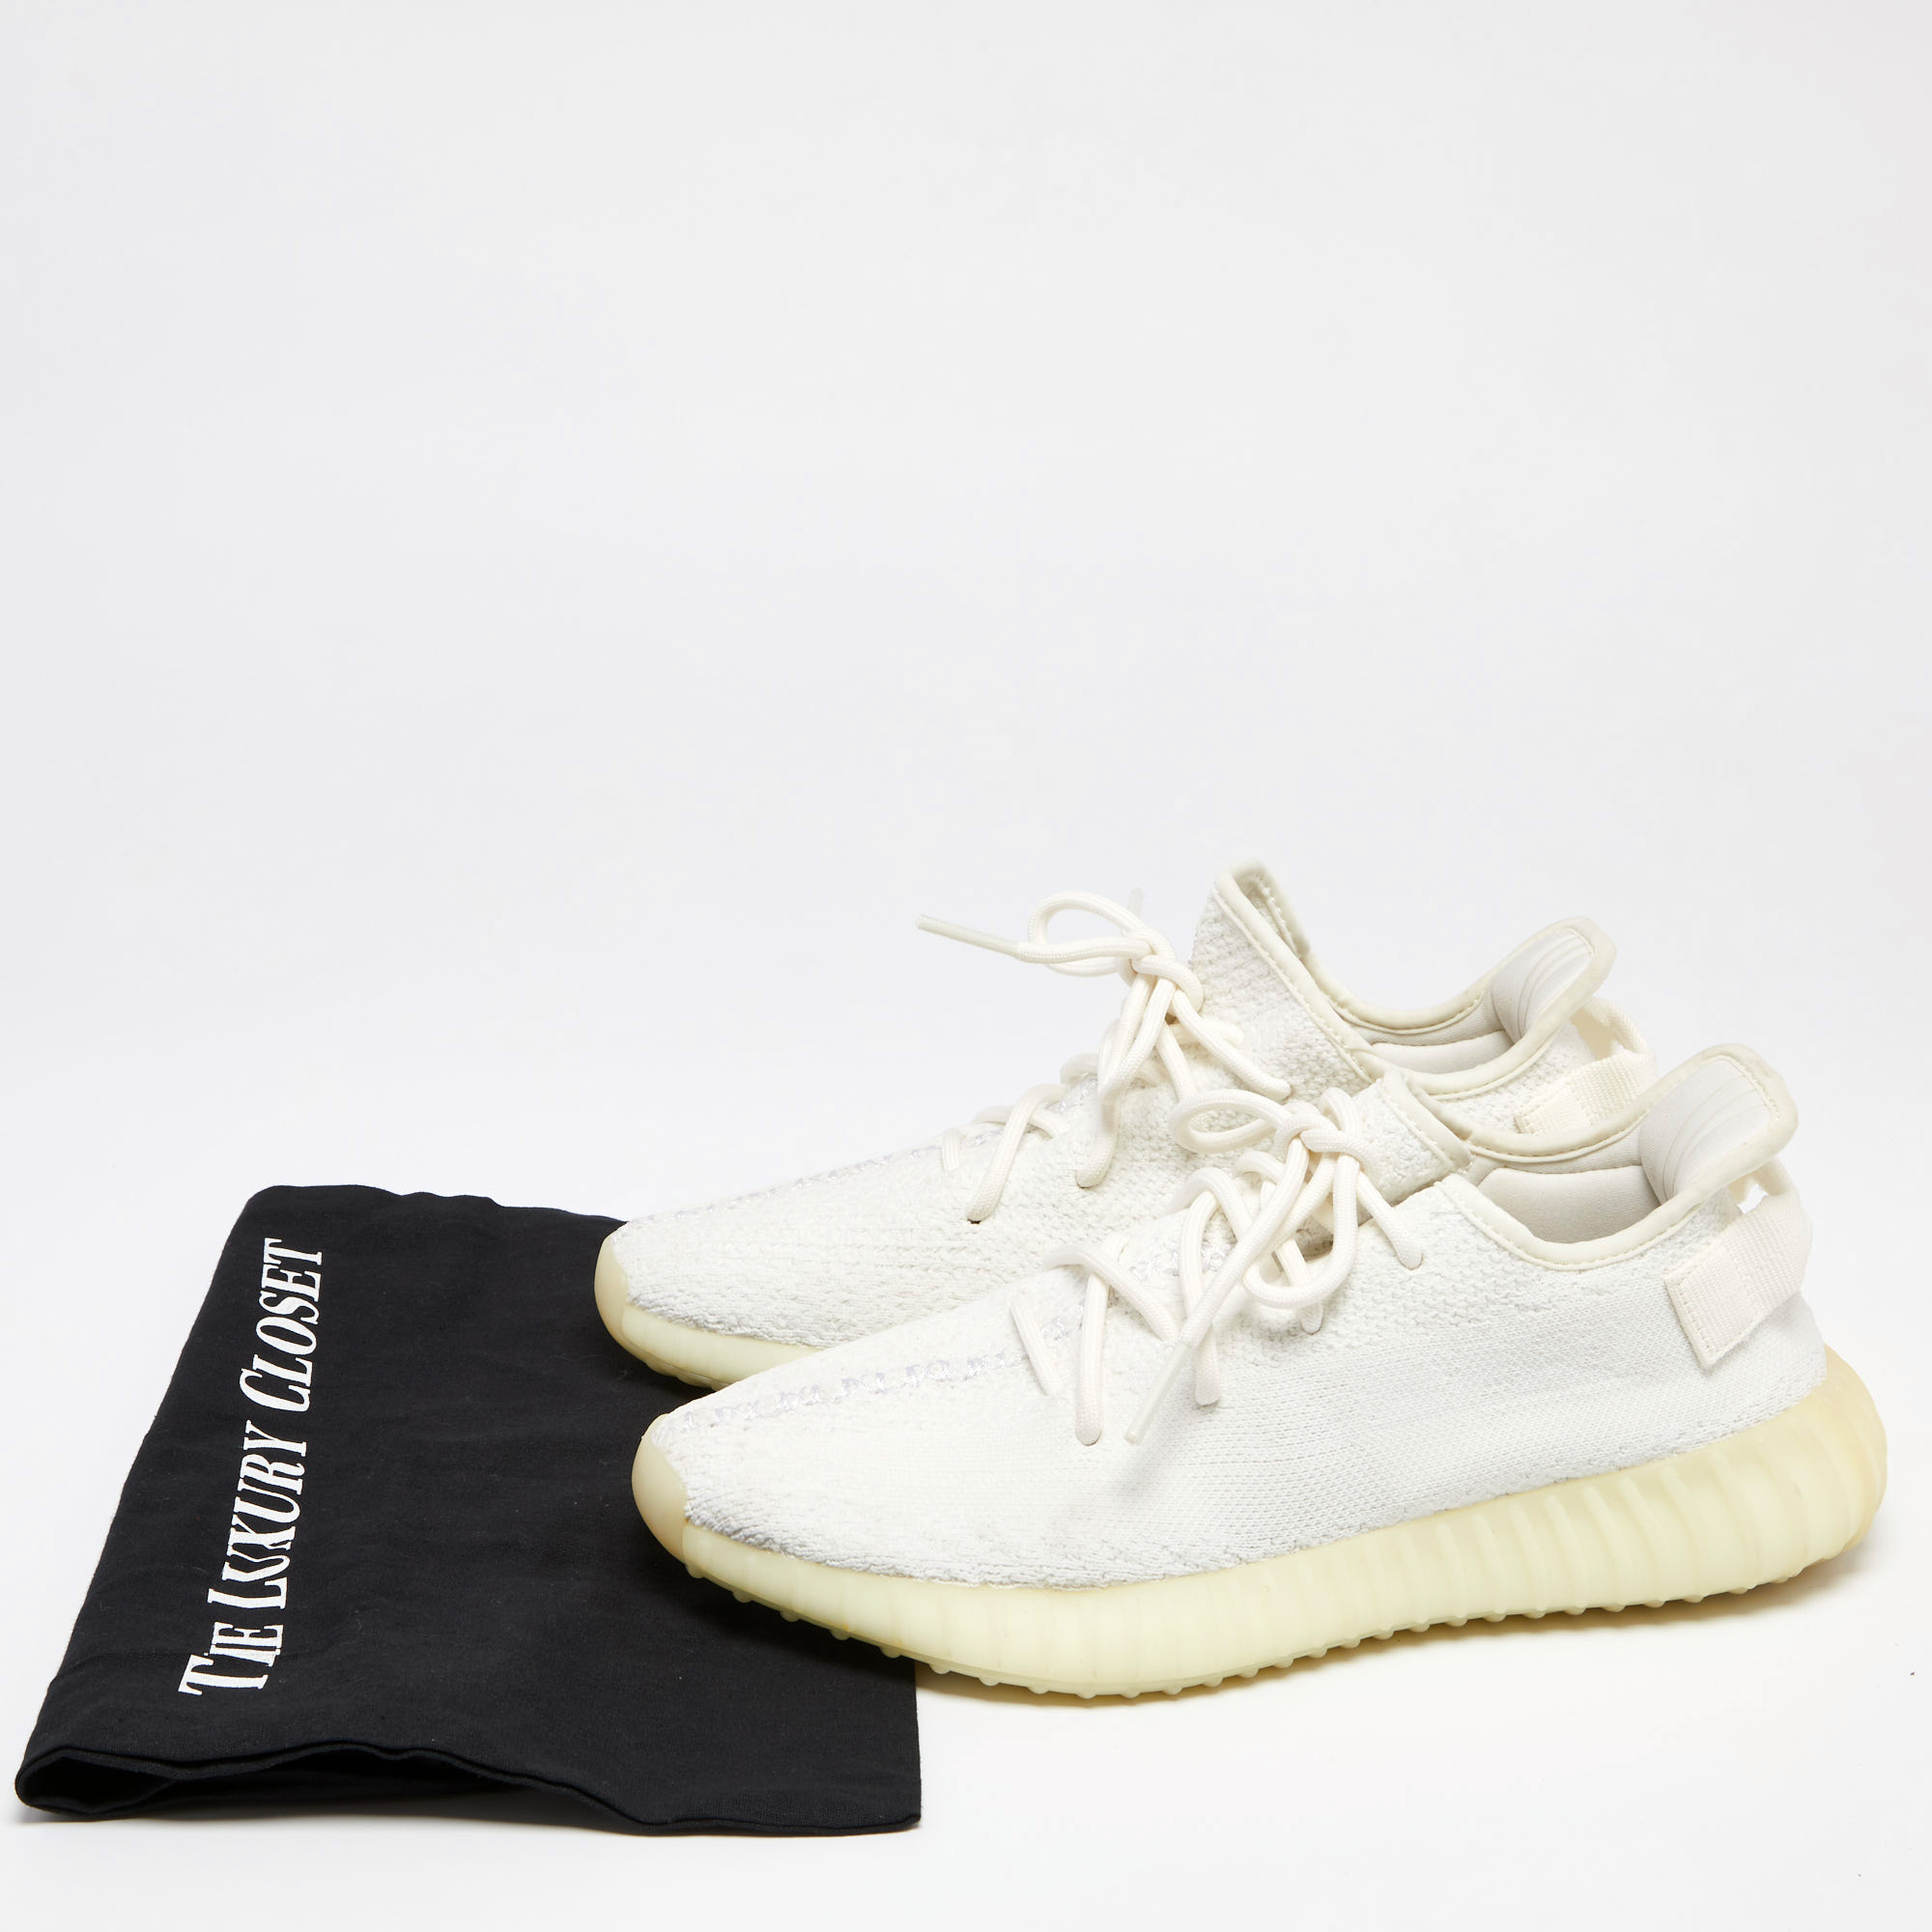 Yeezy X Adidas White Knit Fabric Boost 350 V2 Triple White Sneakers Size 42